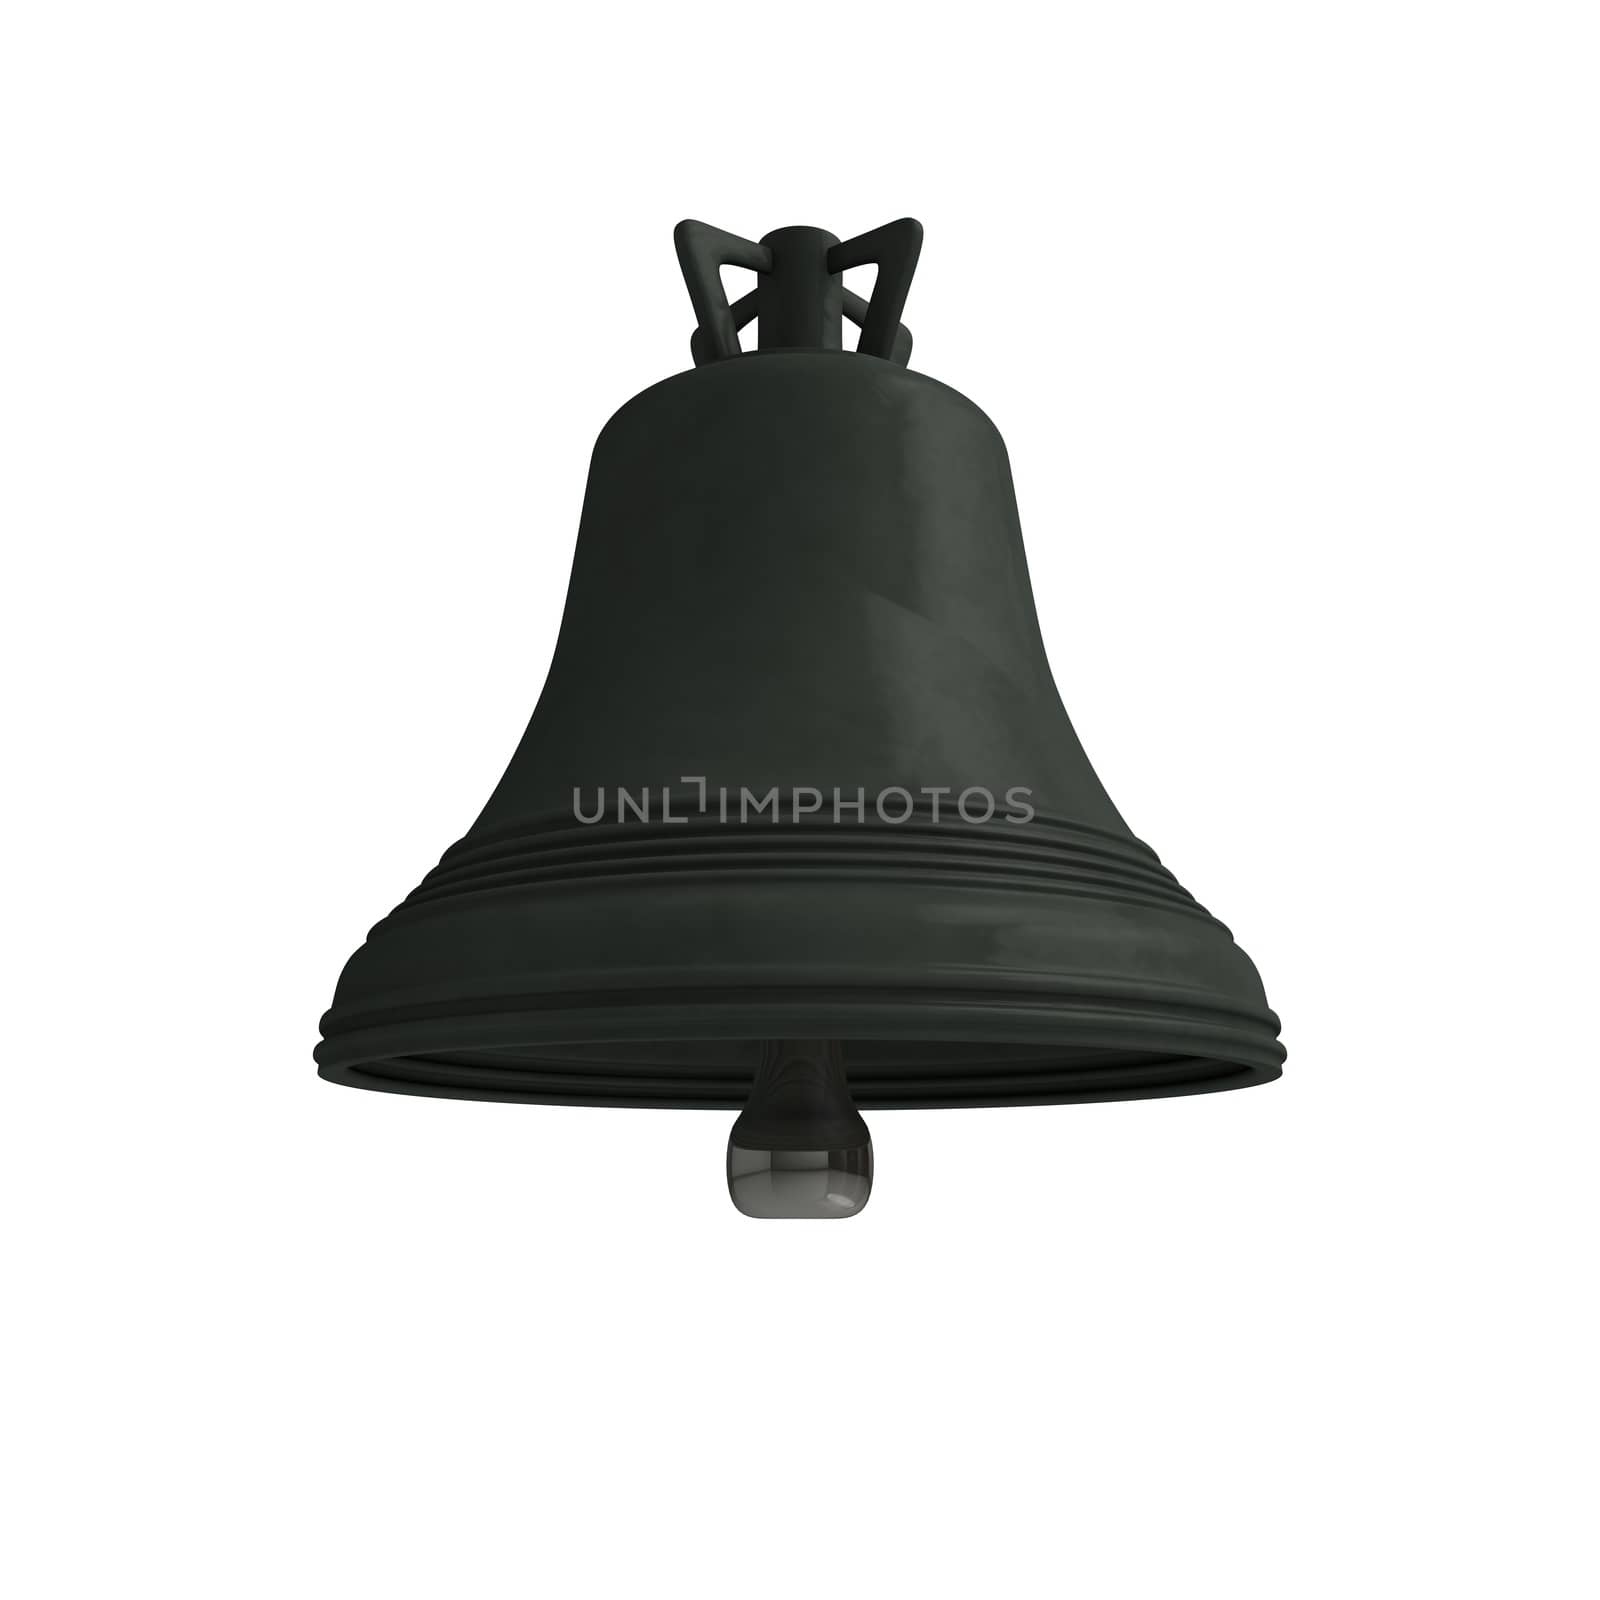 It is depicted a black 3d bell.